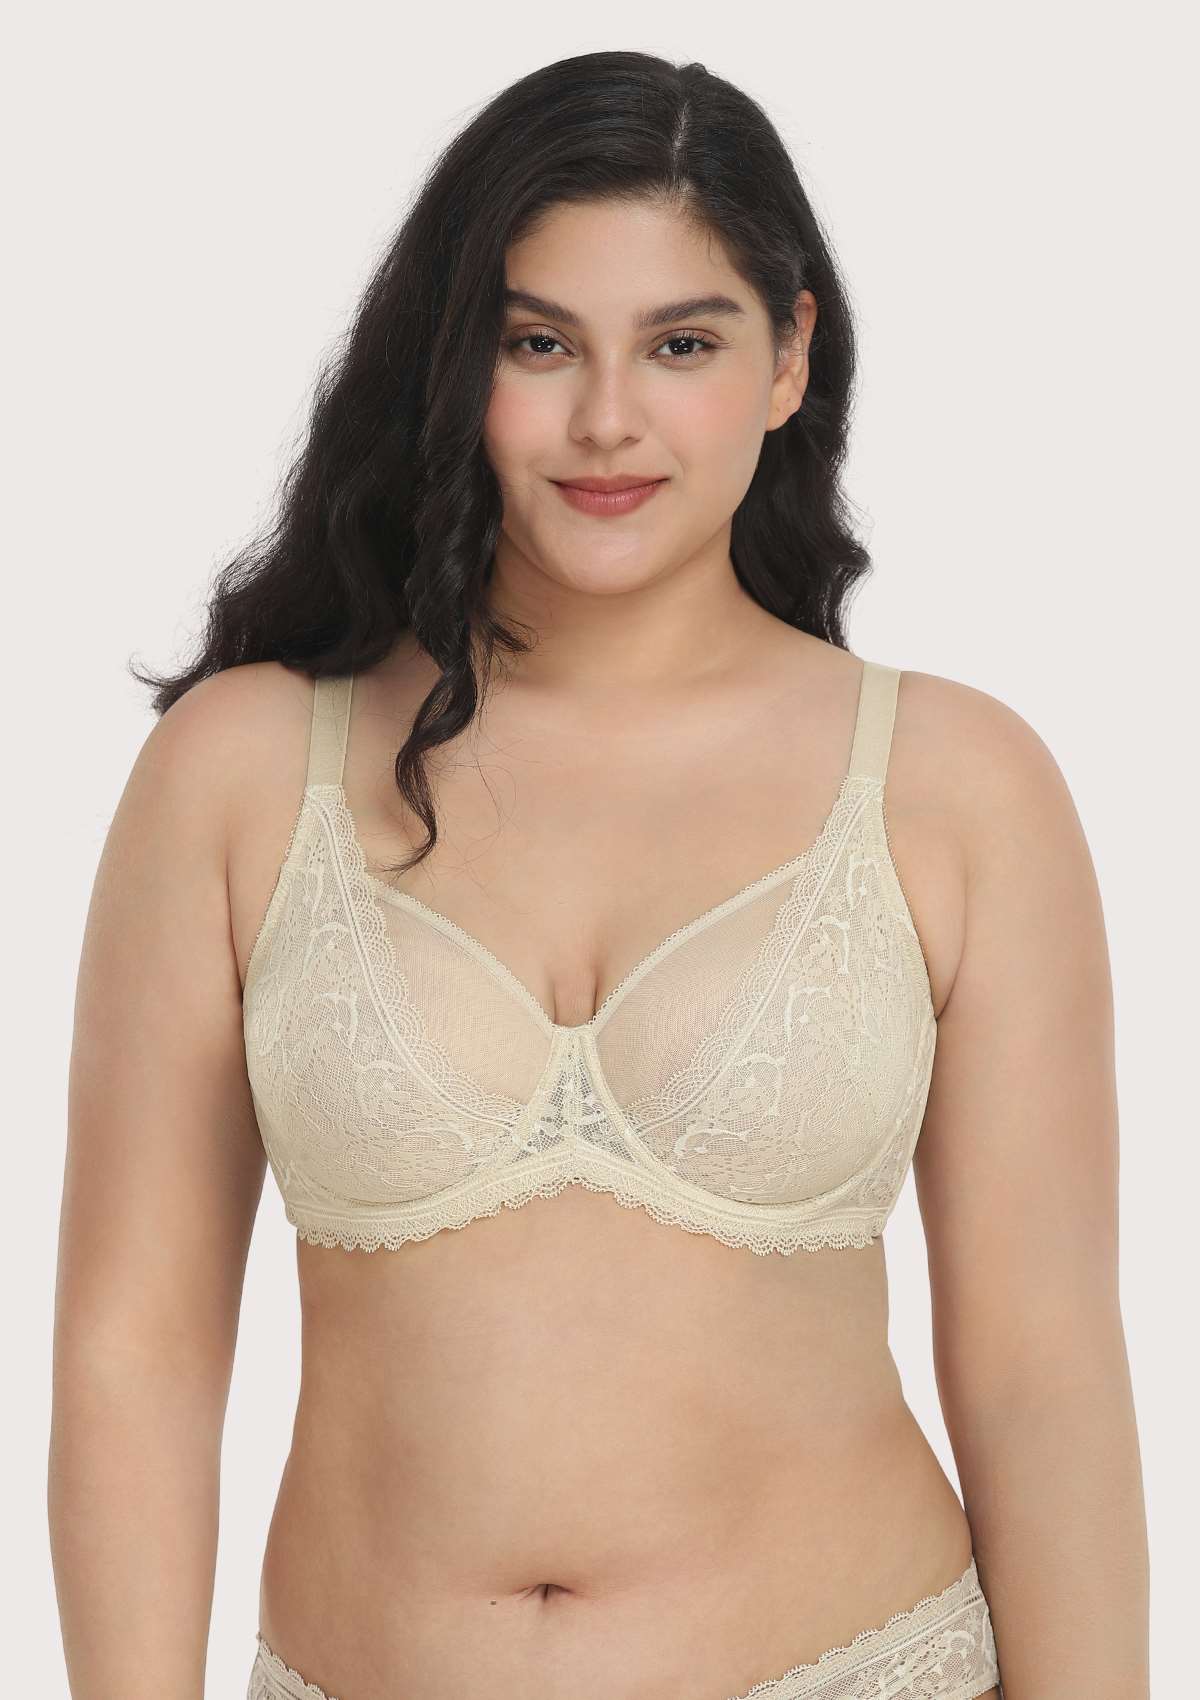 HSIA Anemone Lace Unlined Bra: Supportive, Lightweight Bra - Champagne / 38 / C